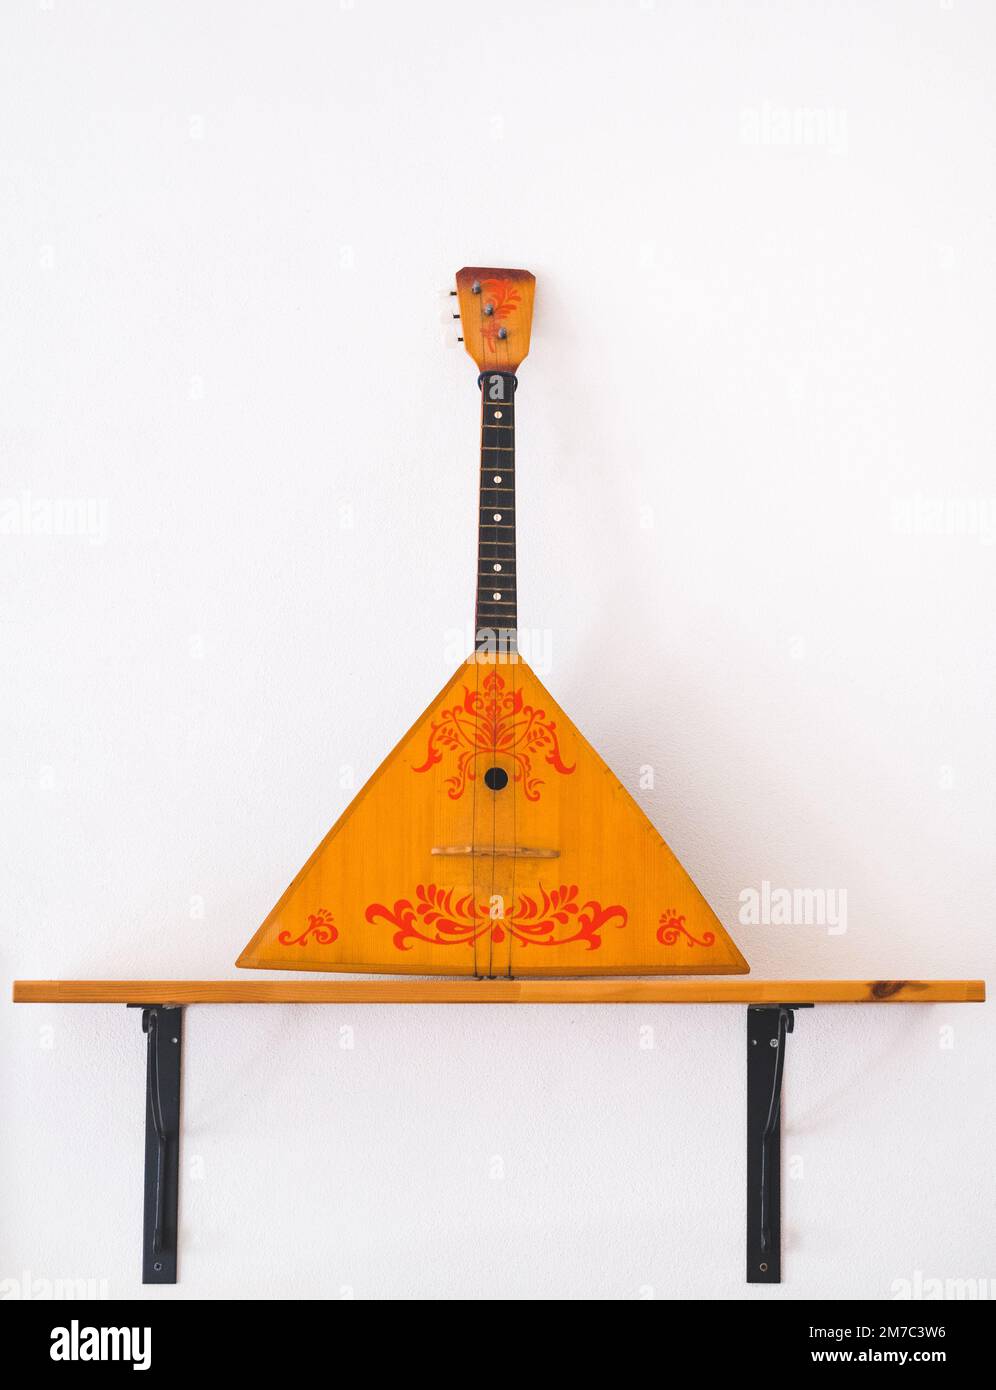 Balalaika is a Russian stringed musical instrument with a characteristic  wooden triangular hollow body, fretted neck and three strings Stock Photo -  Alamy